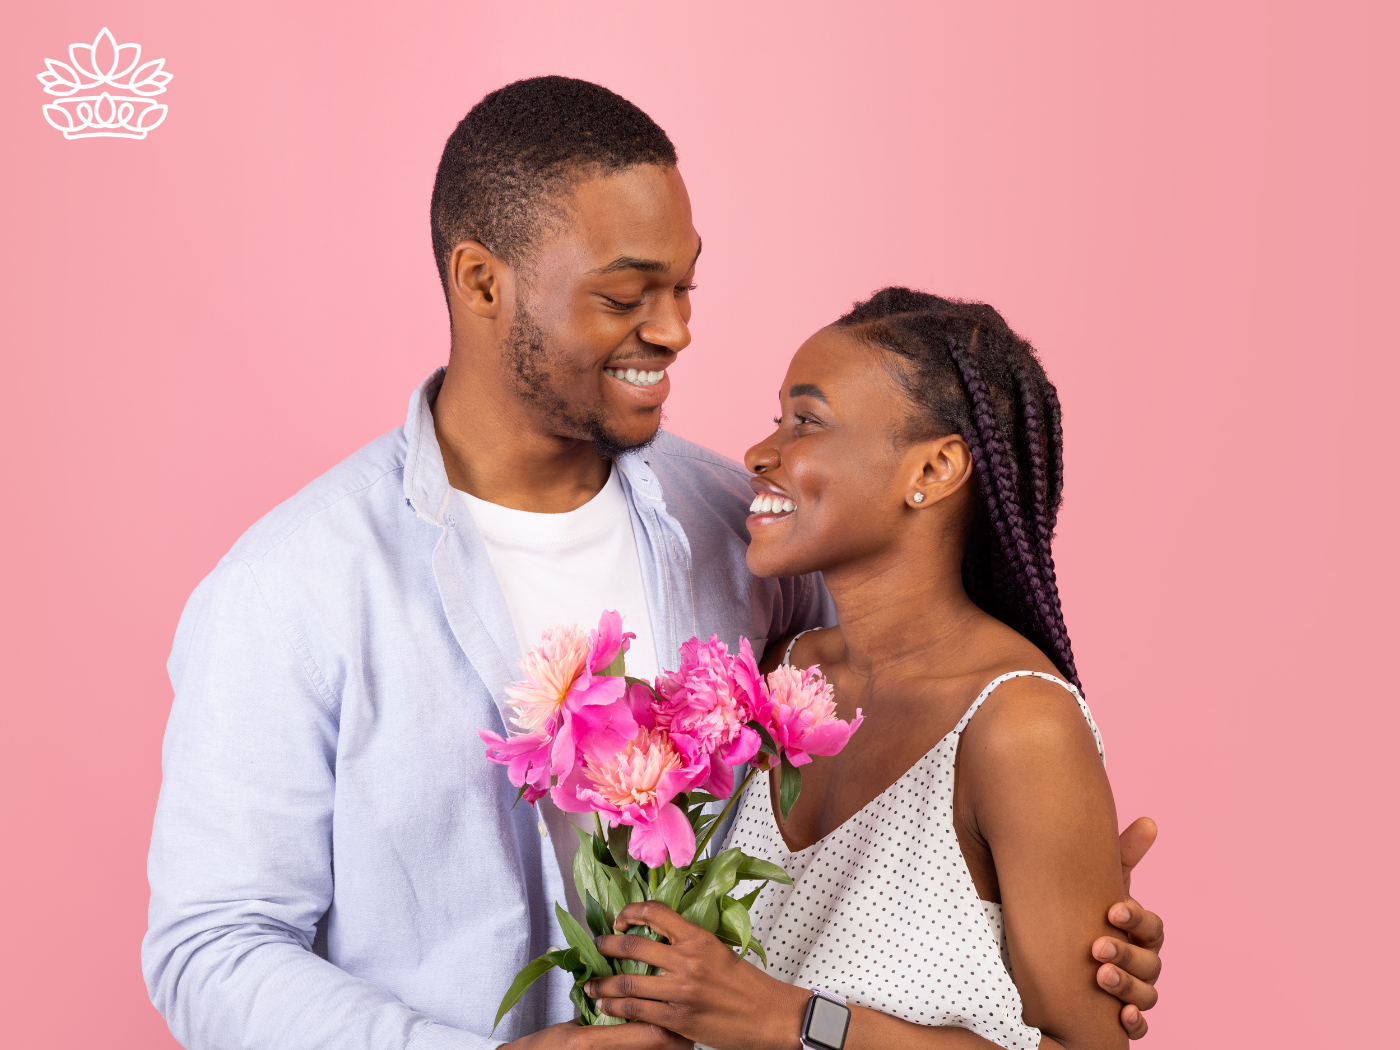 A couple exchanging a bouquet of pink flowers and smiling - Fabulous Flowers and Gifts, All Fabulous Flowers and Gift Boxes.